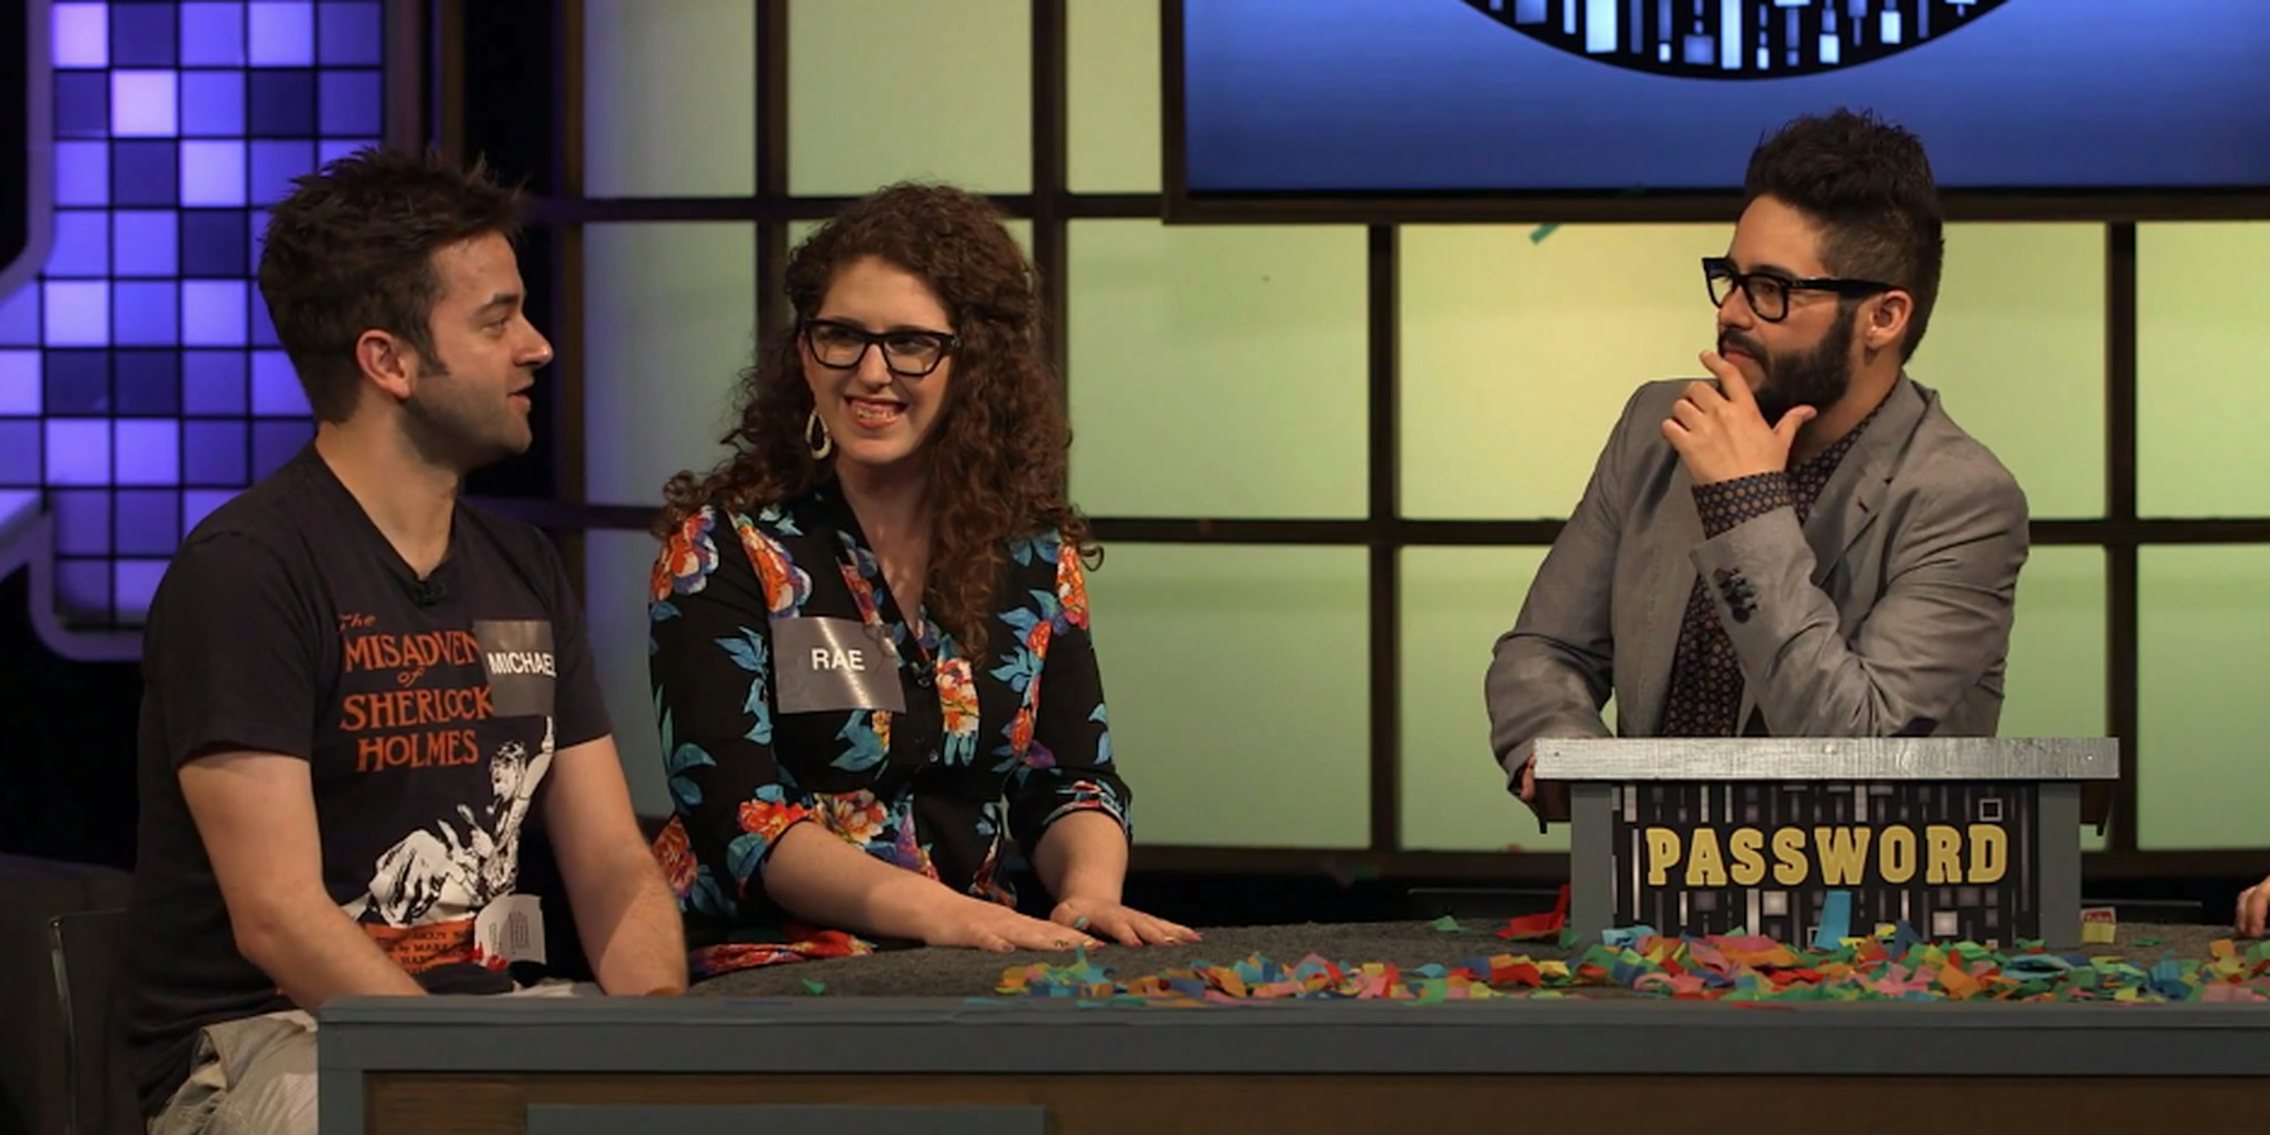 YouTube's Buzzr game show channel returns with a fresh season and a